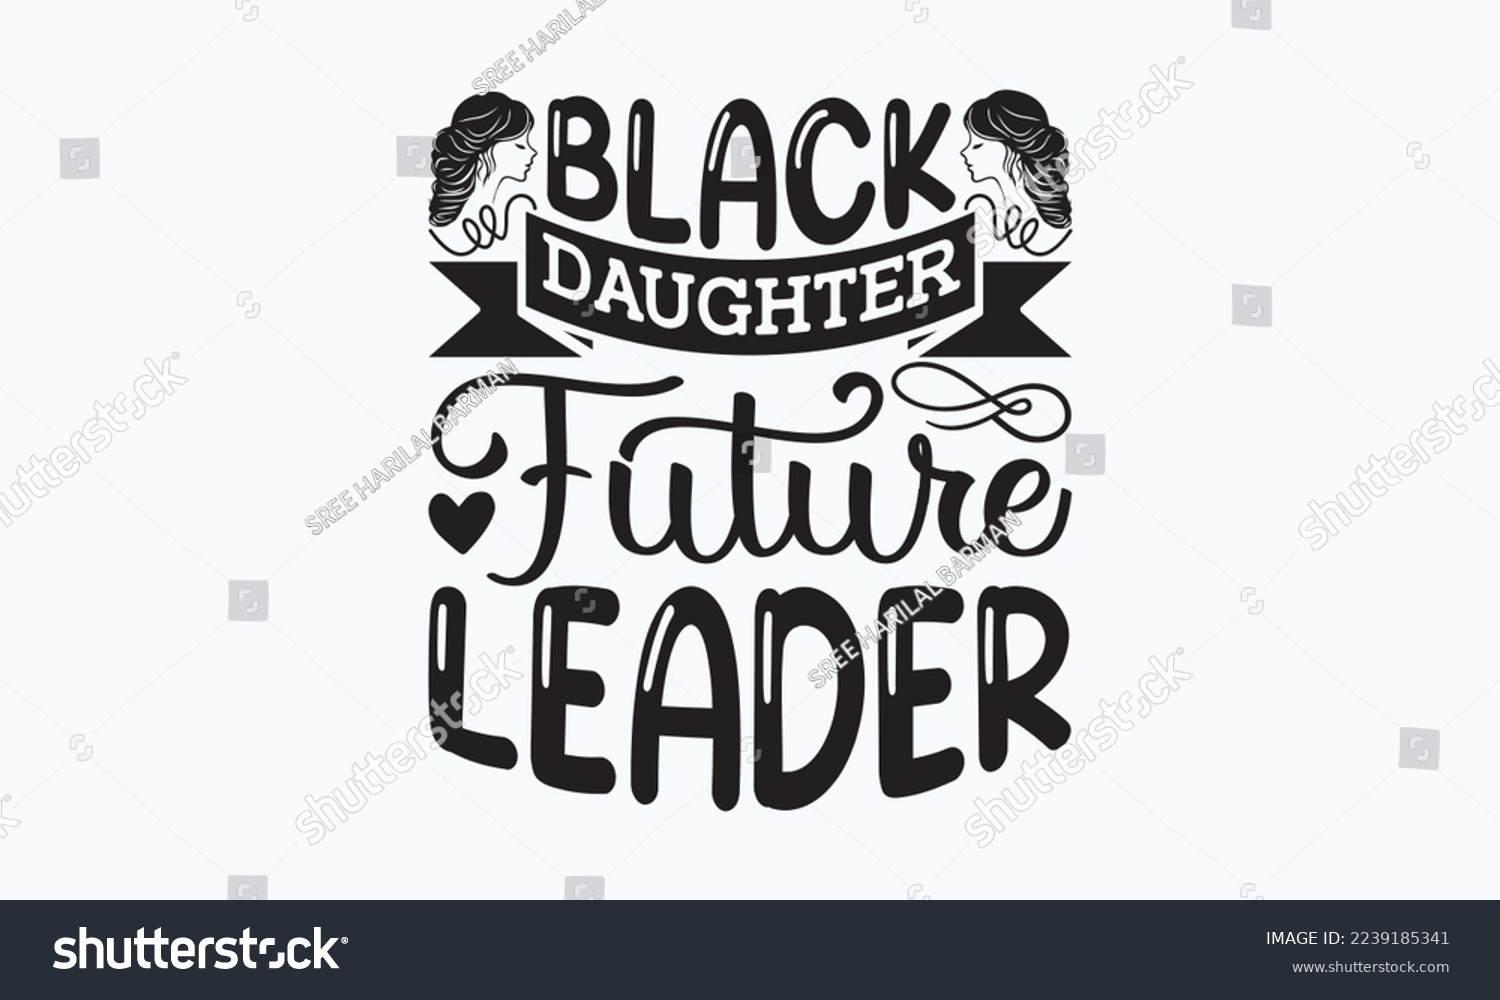 SVG of Black daughter future leader  - T-shirt Design, File Sports SVG Design, Sports typography t-shirt design, For stickers, Templet, mugs, etc. for Cutting, cards, and flyers. svg